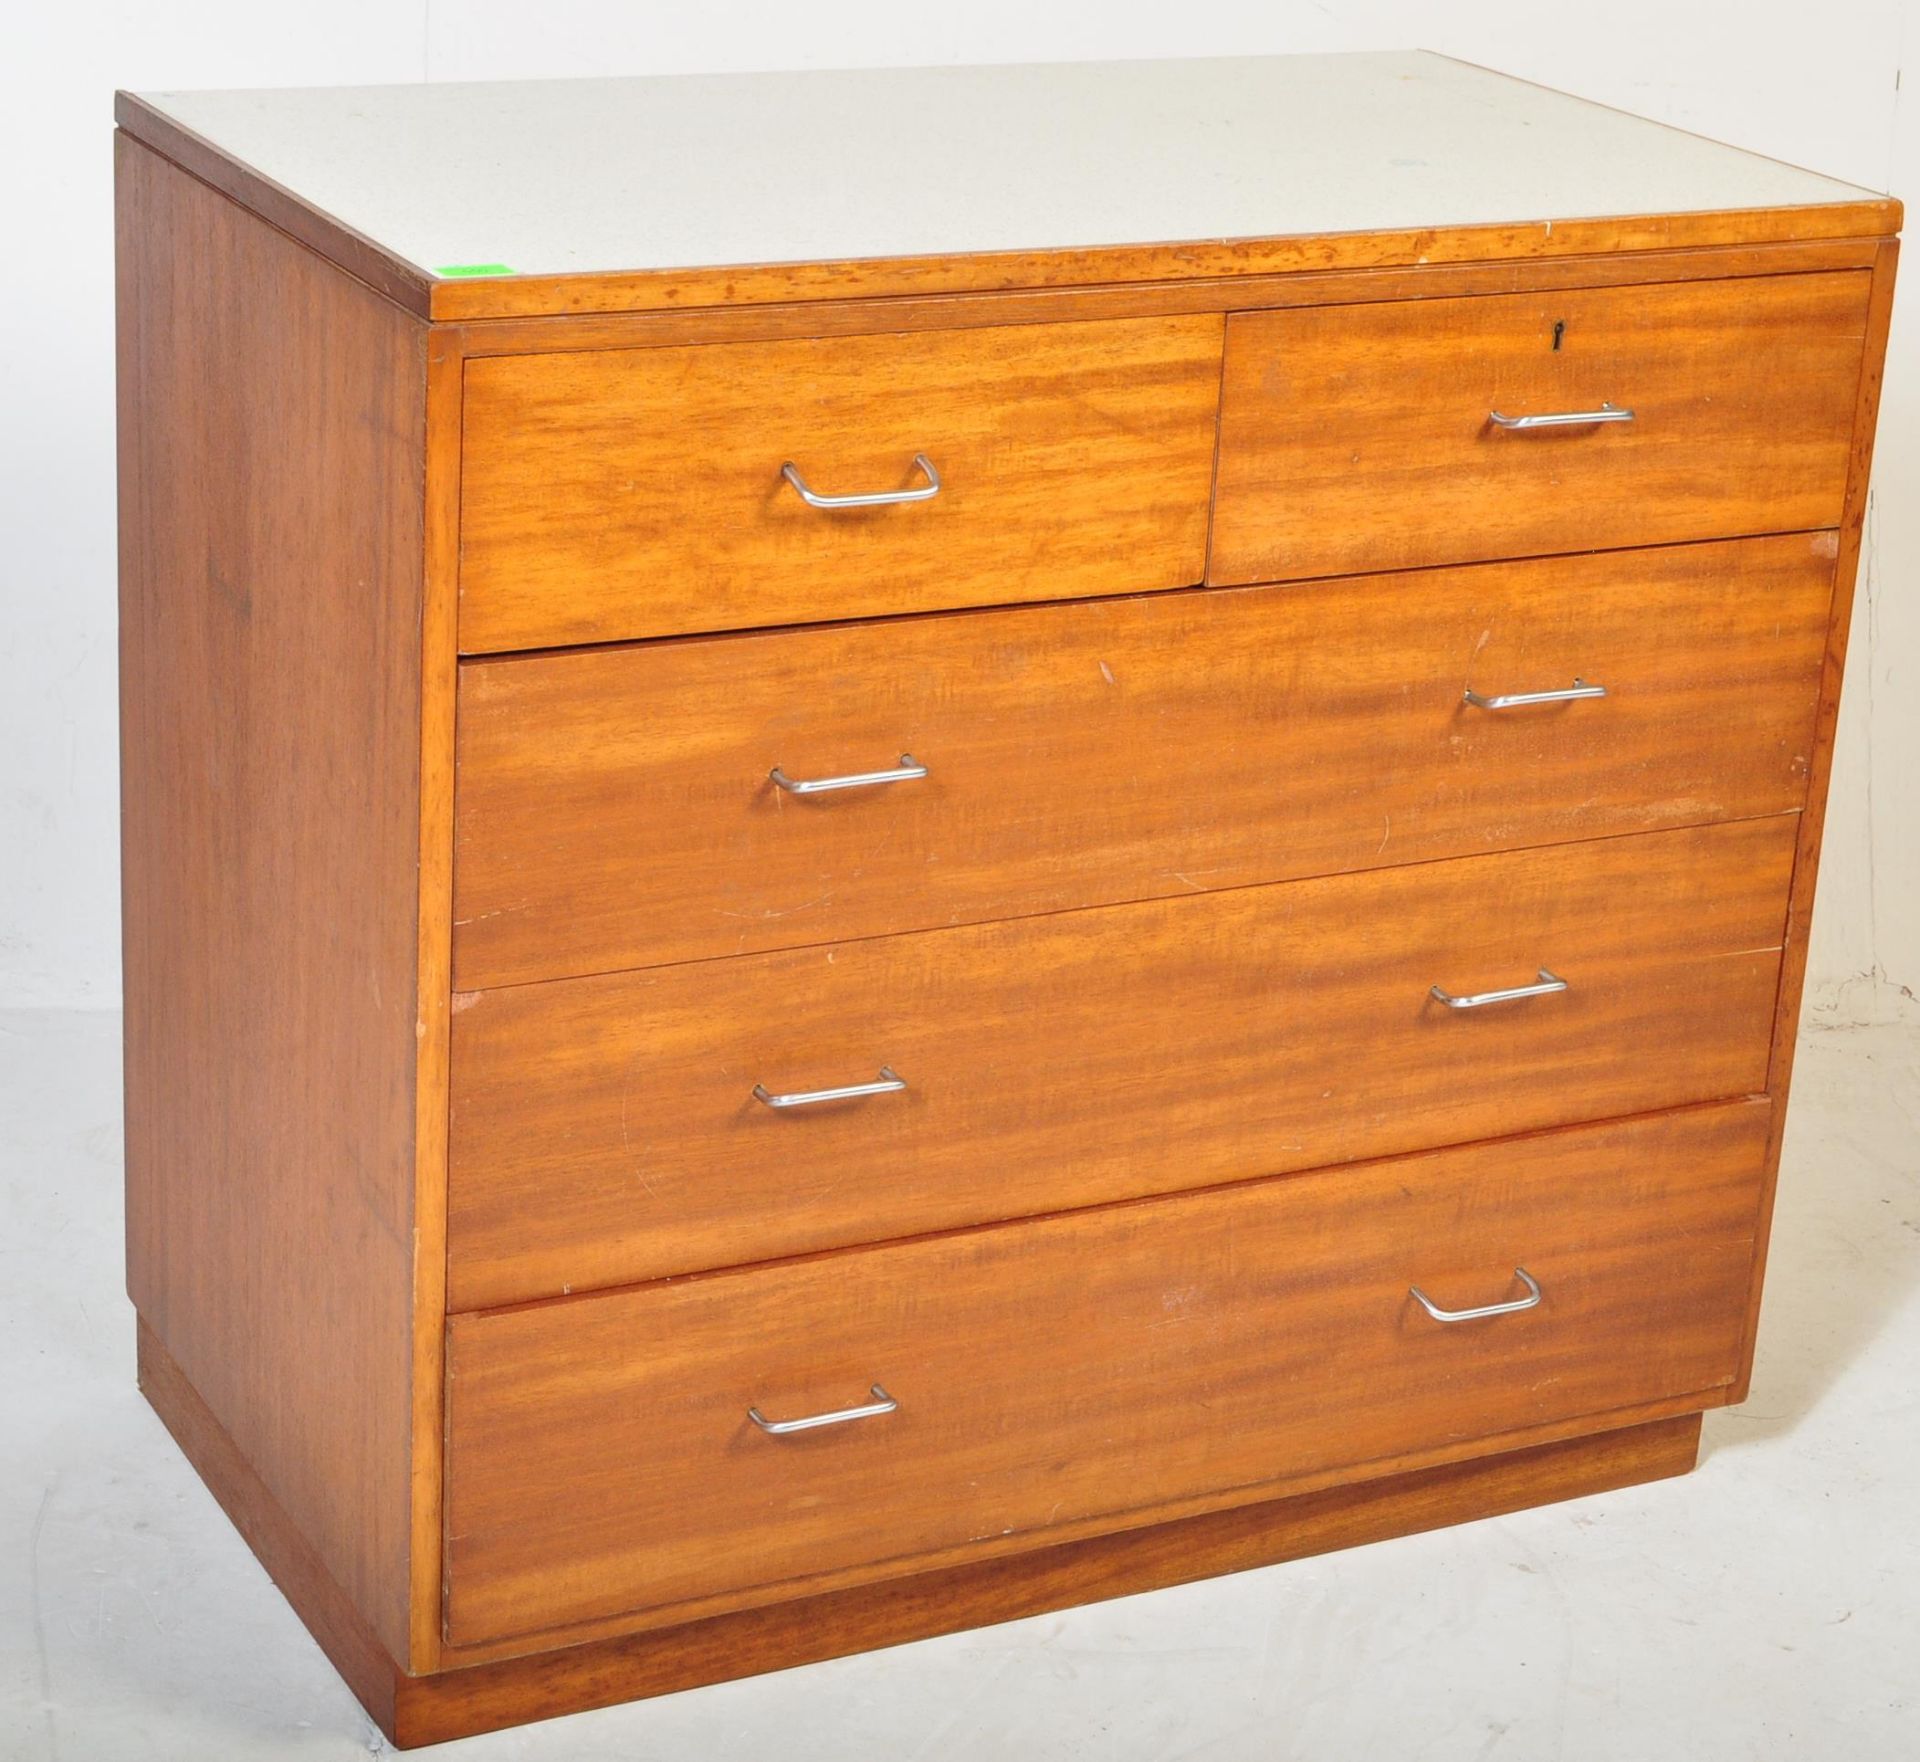 BEAUTILITY RETRO CHEST OF DRAWERS - Image 2 of 6